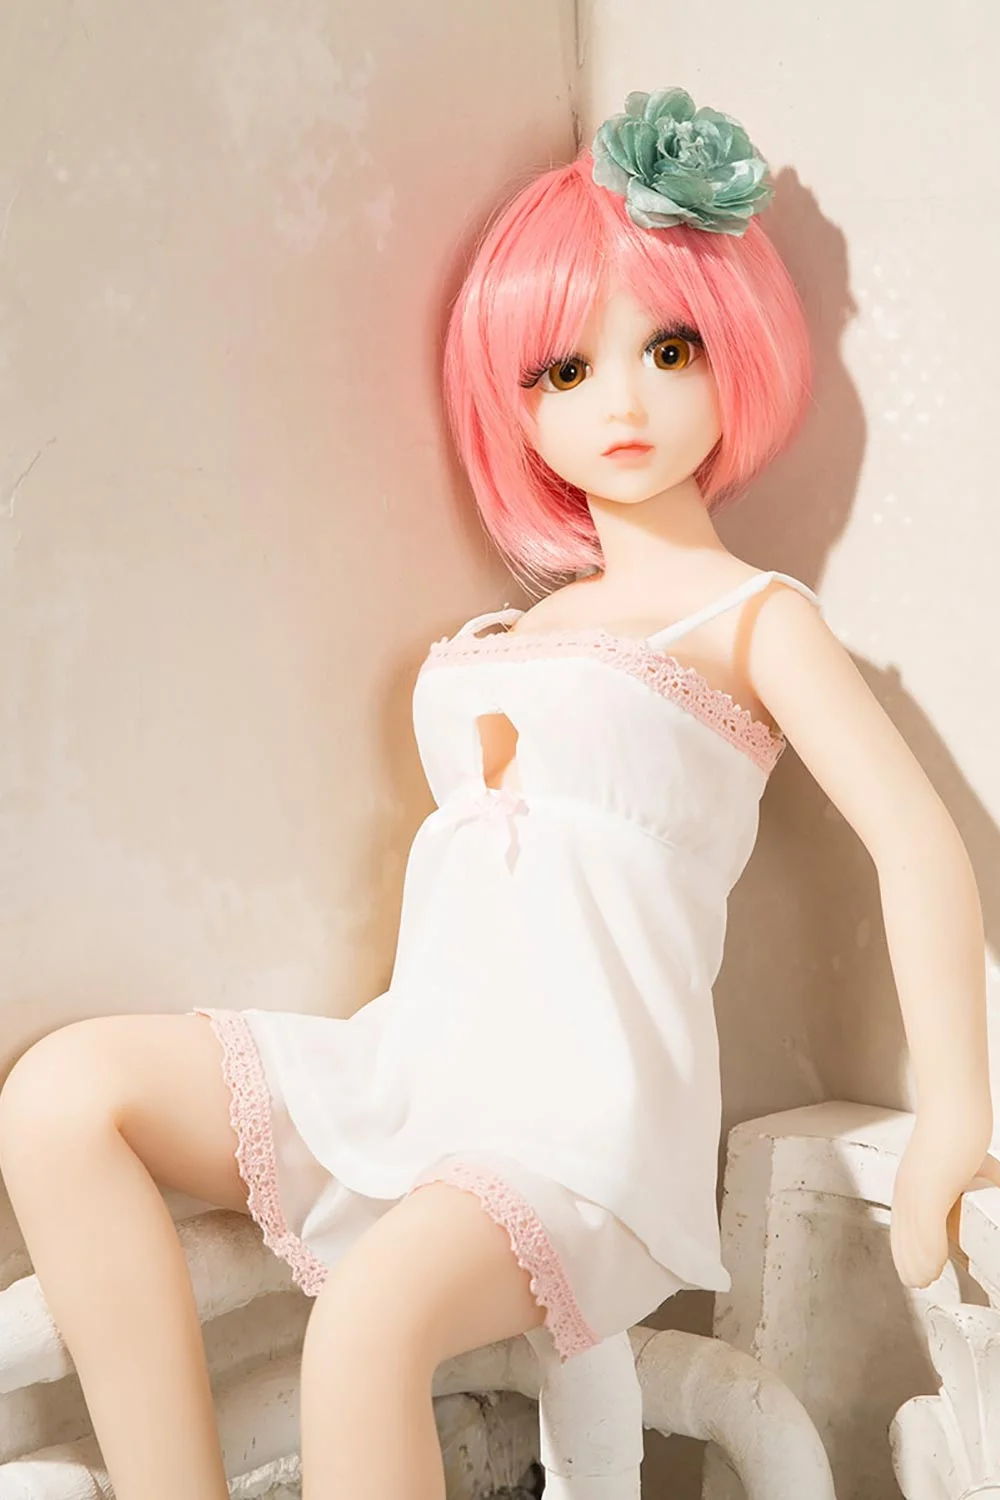 Mini sex doll with short pink hair leaning against the wall